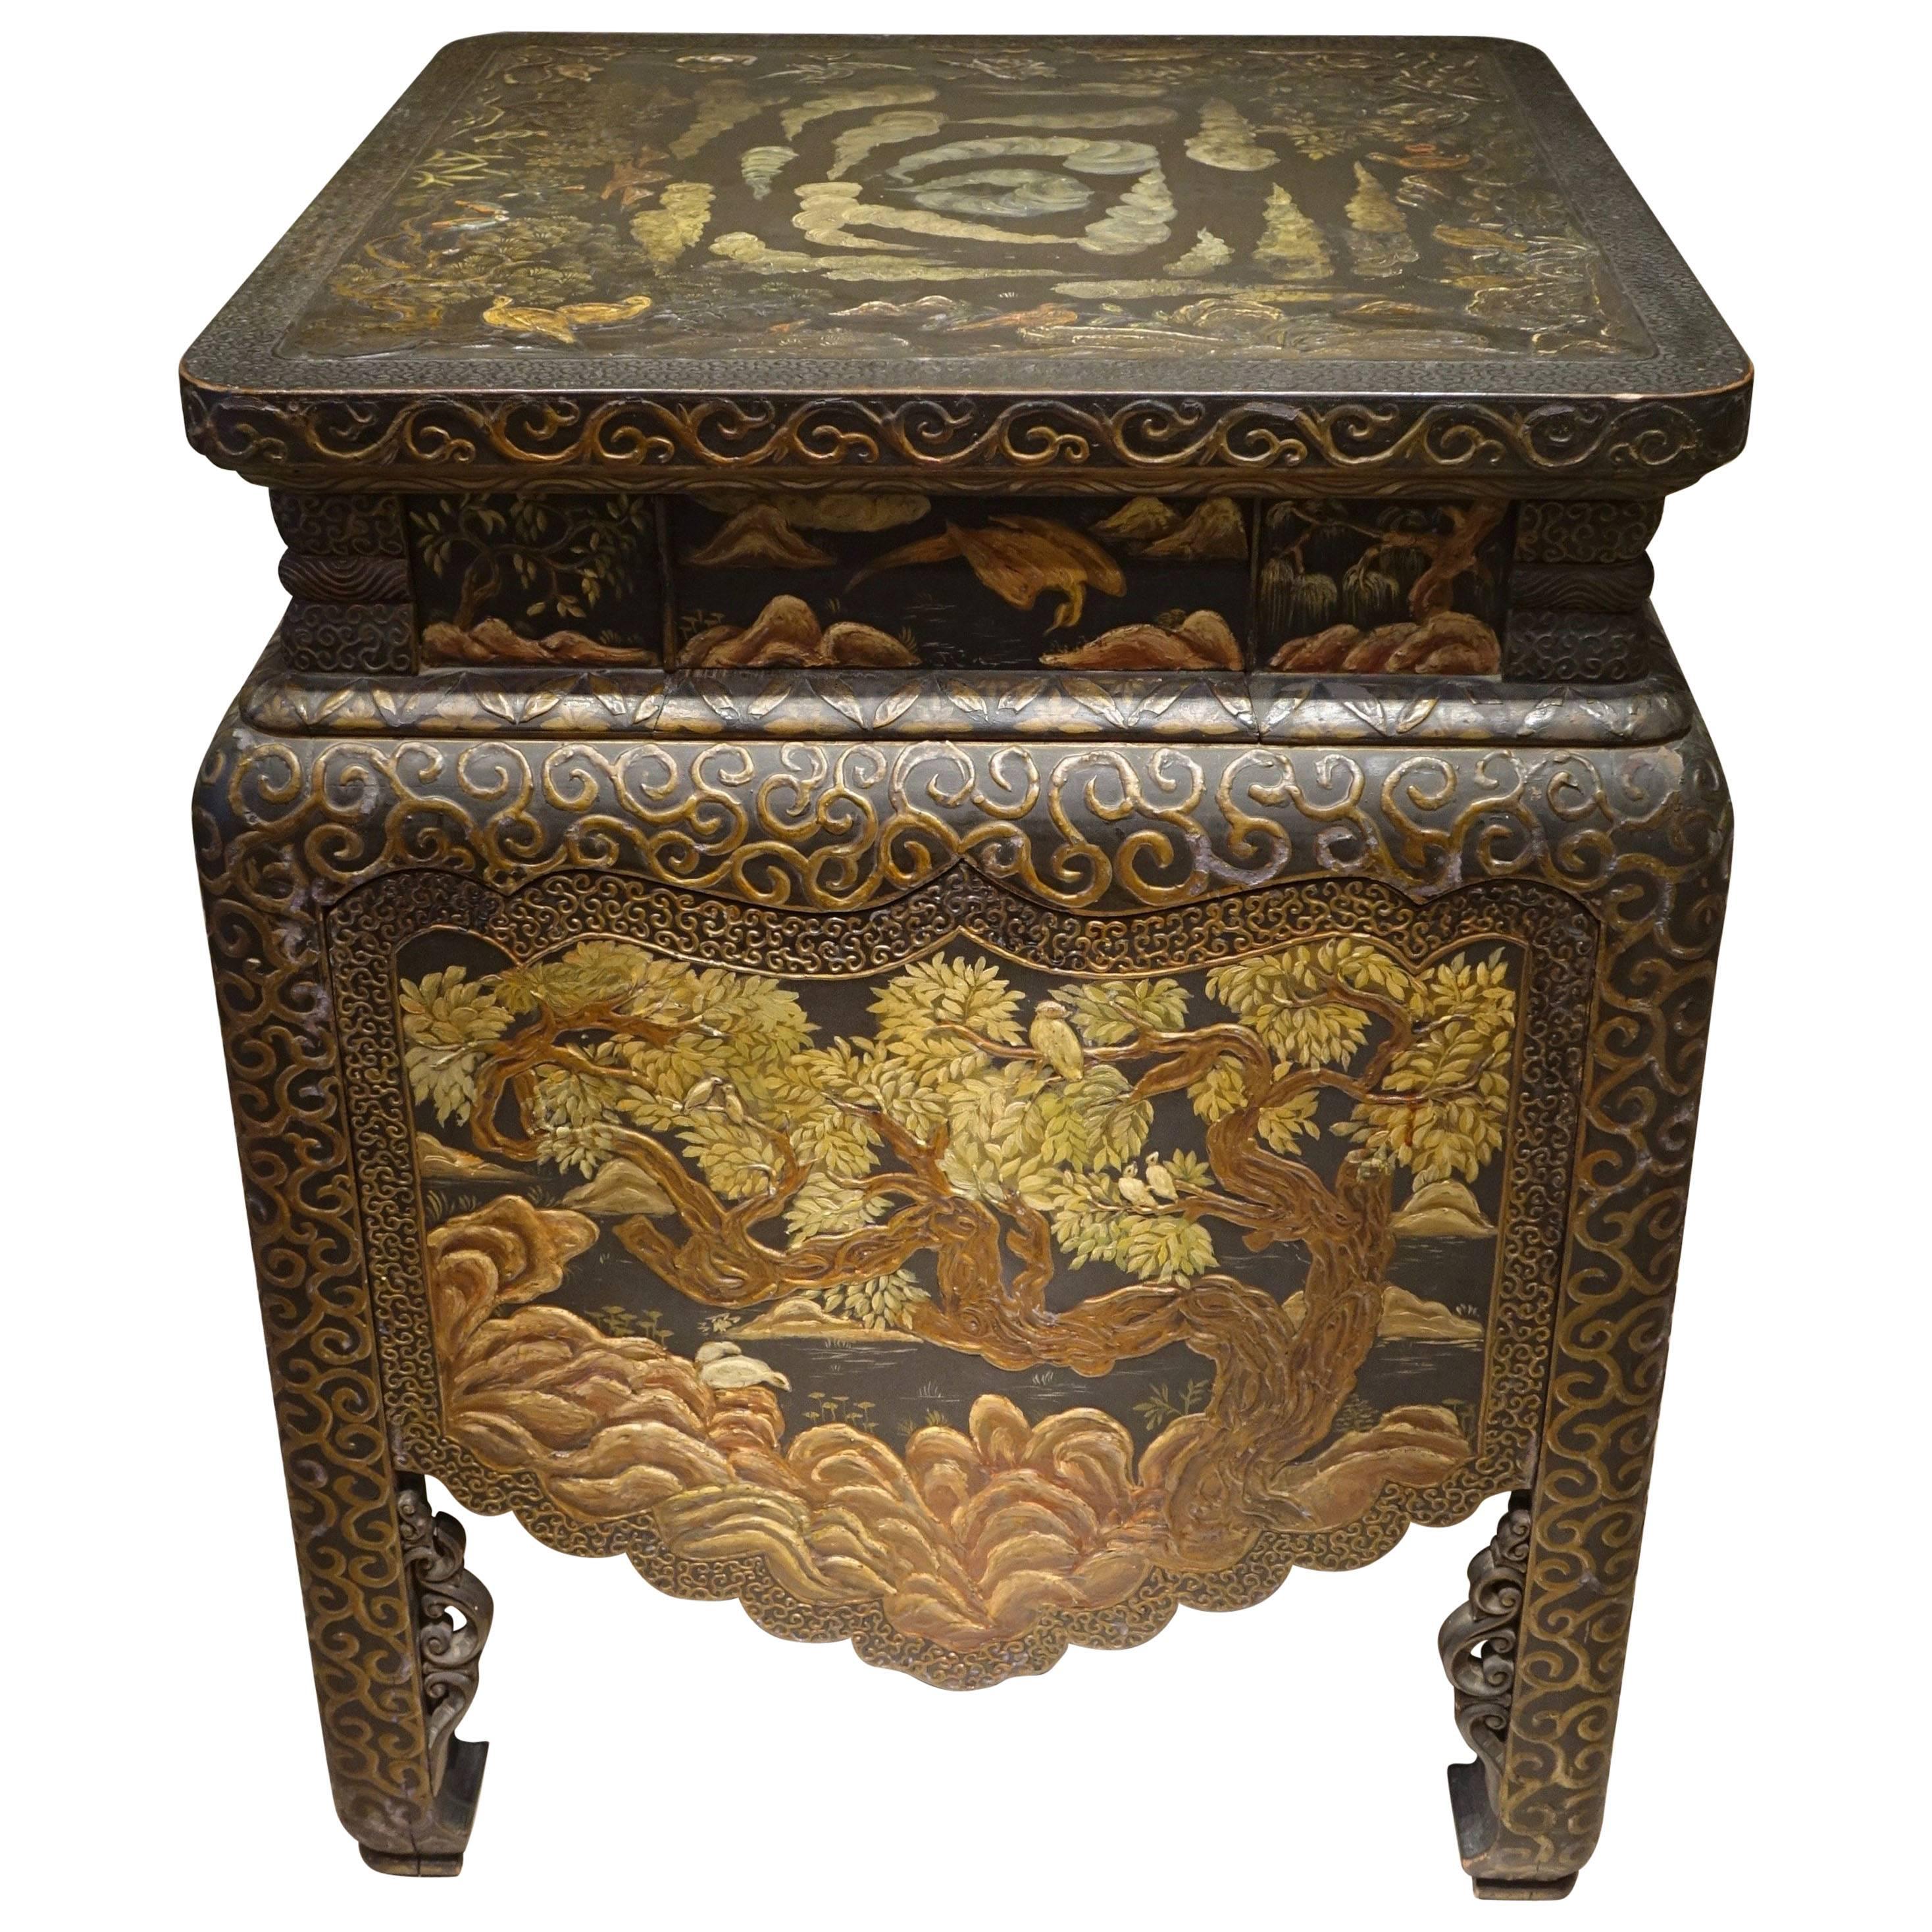 Unusual Chinese Lacquer Storage Table for Prints, circa 1920